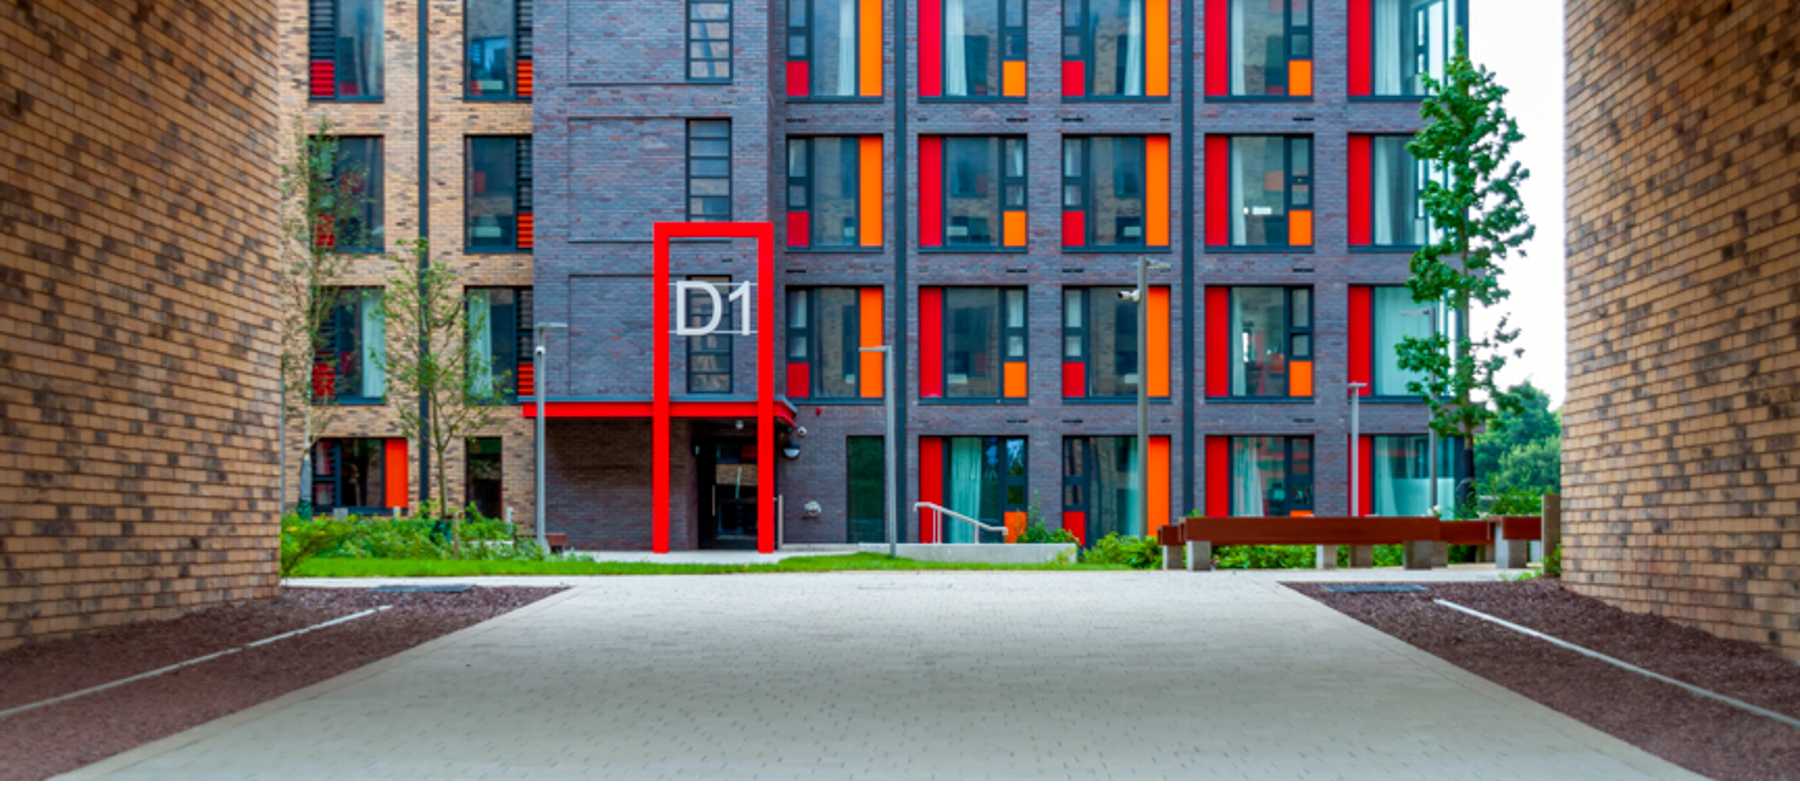 UCD Block D Residential Accommodation - KPRO and Paving & Walling